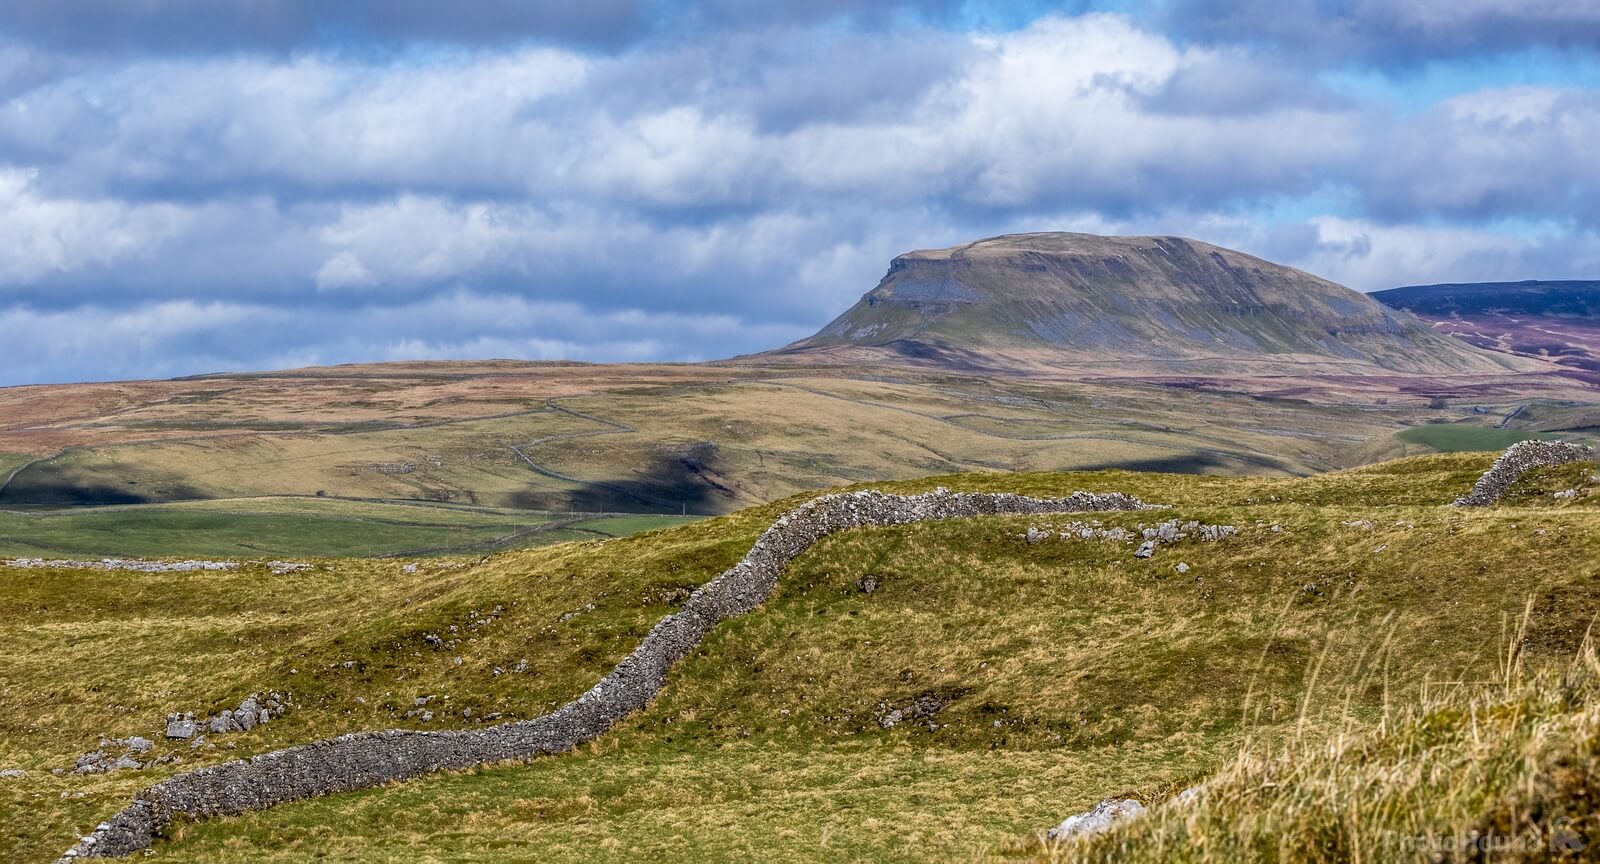 Image of Pen-y-ghent, Ribblesdale by Andy Killingbeck